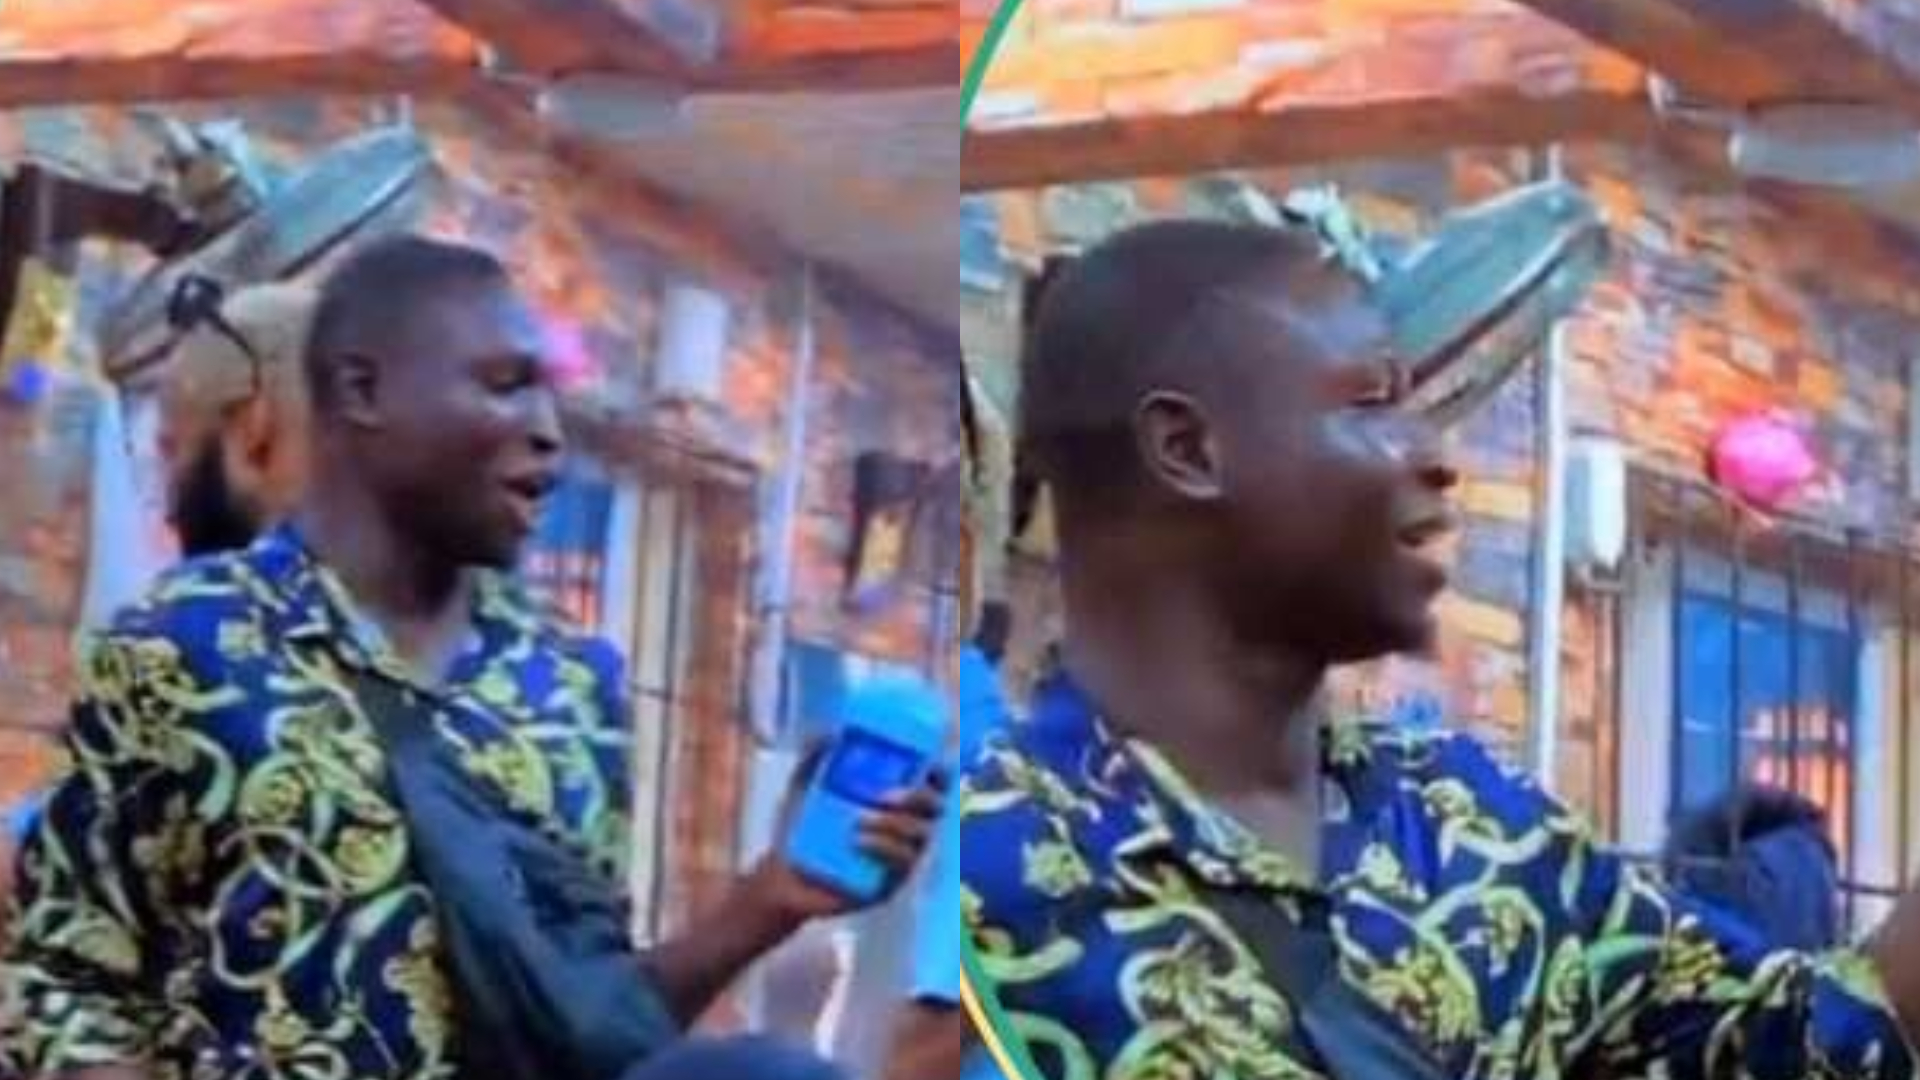 “We Go Give Ourself Joy” - POS Man Entertains Customers with His Humorous and Exciting Claims